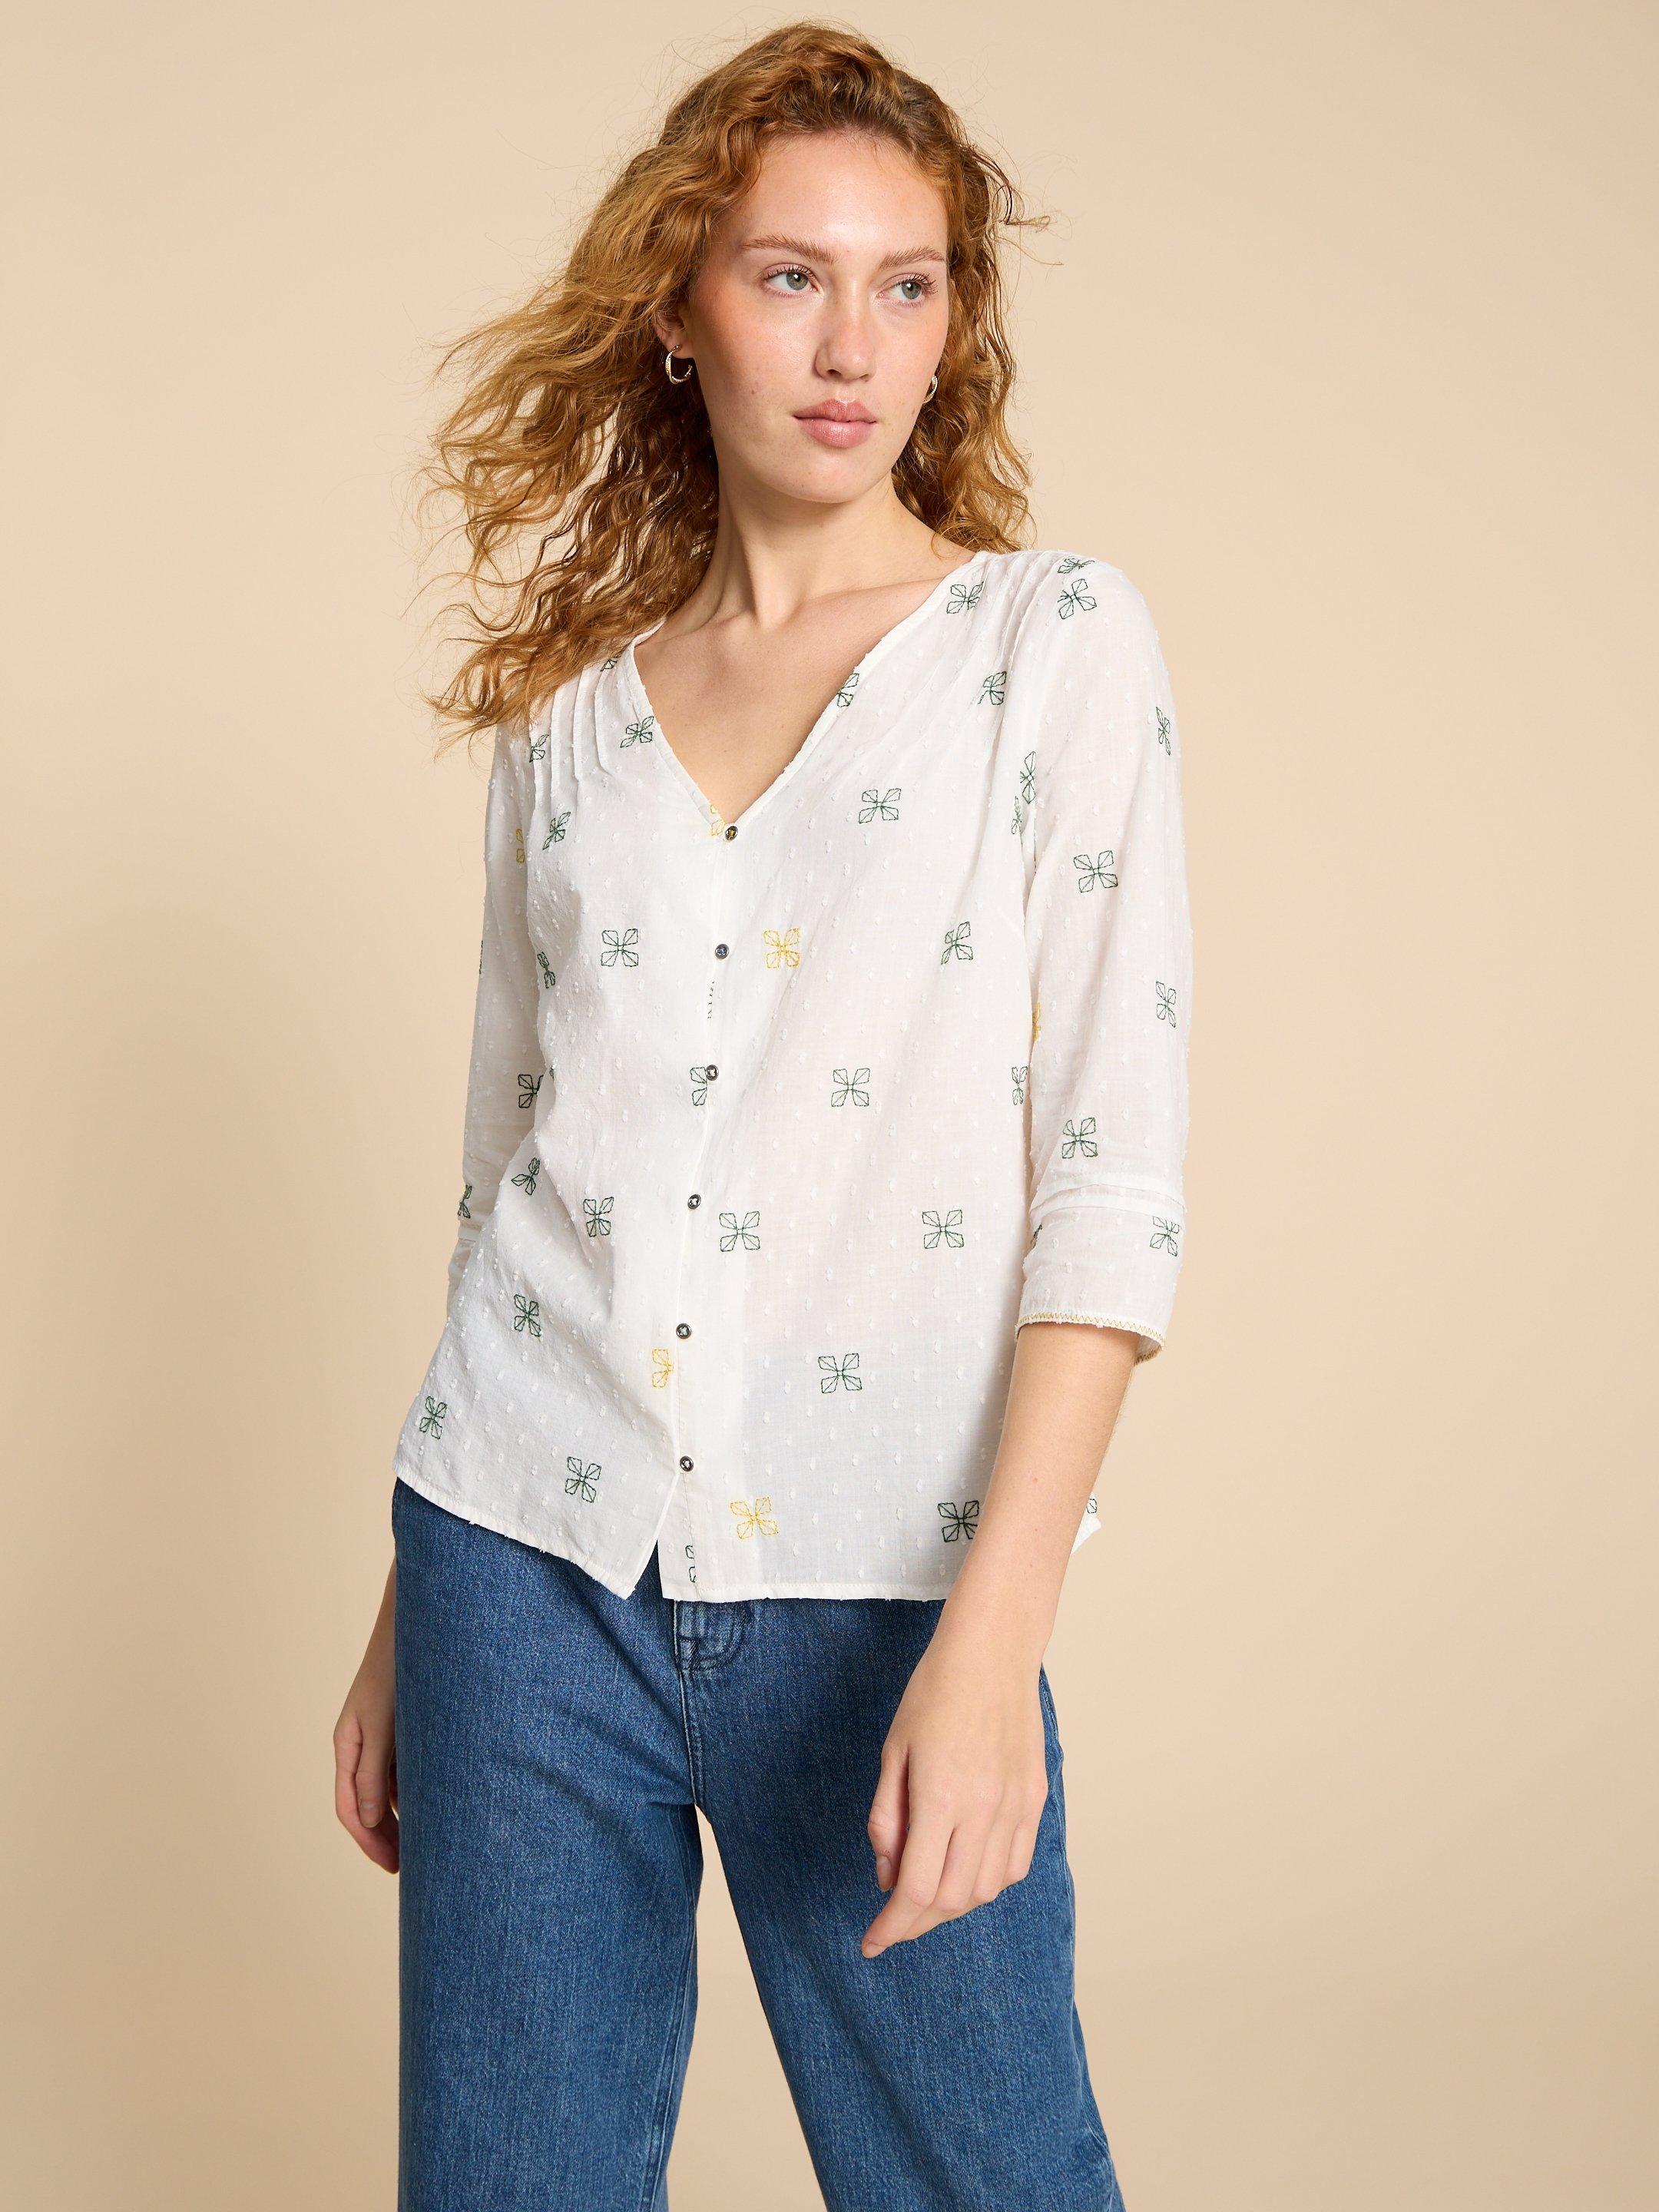 Rae Cotton Top in IVORY MLT - MODEL FRONT